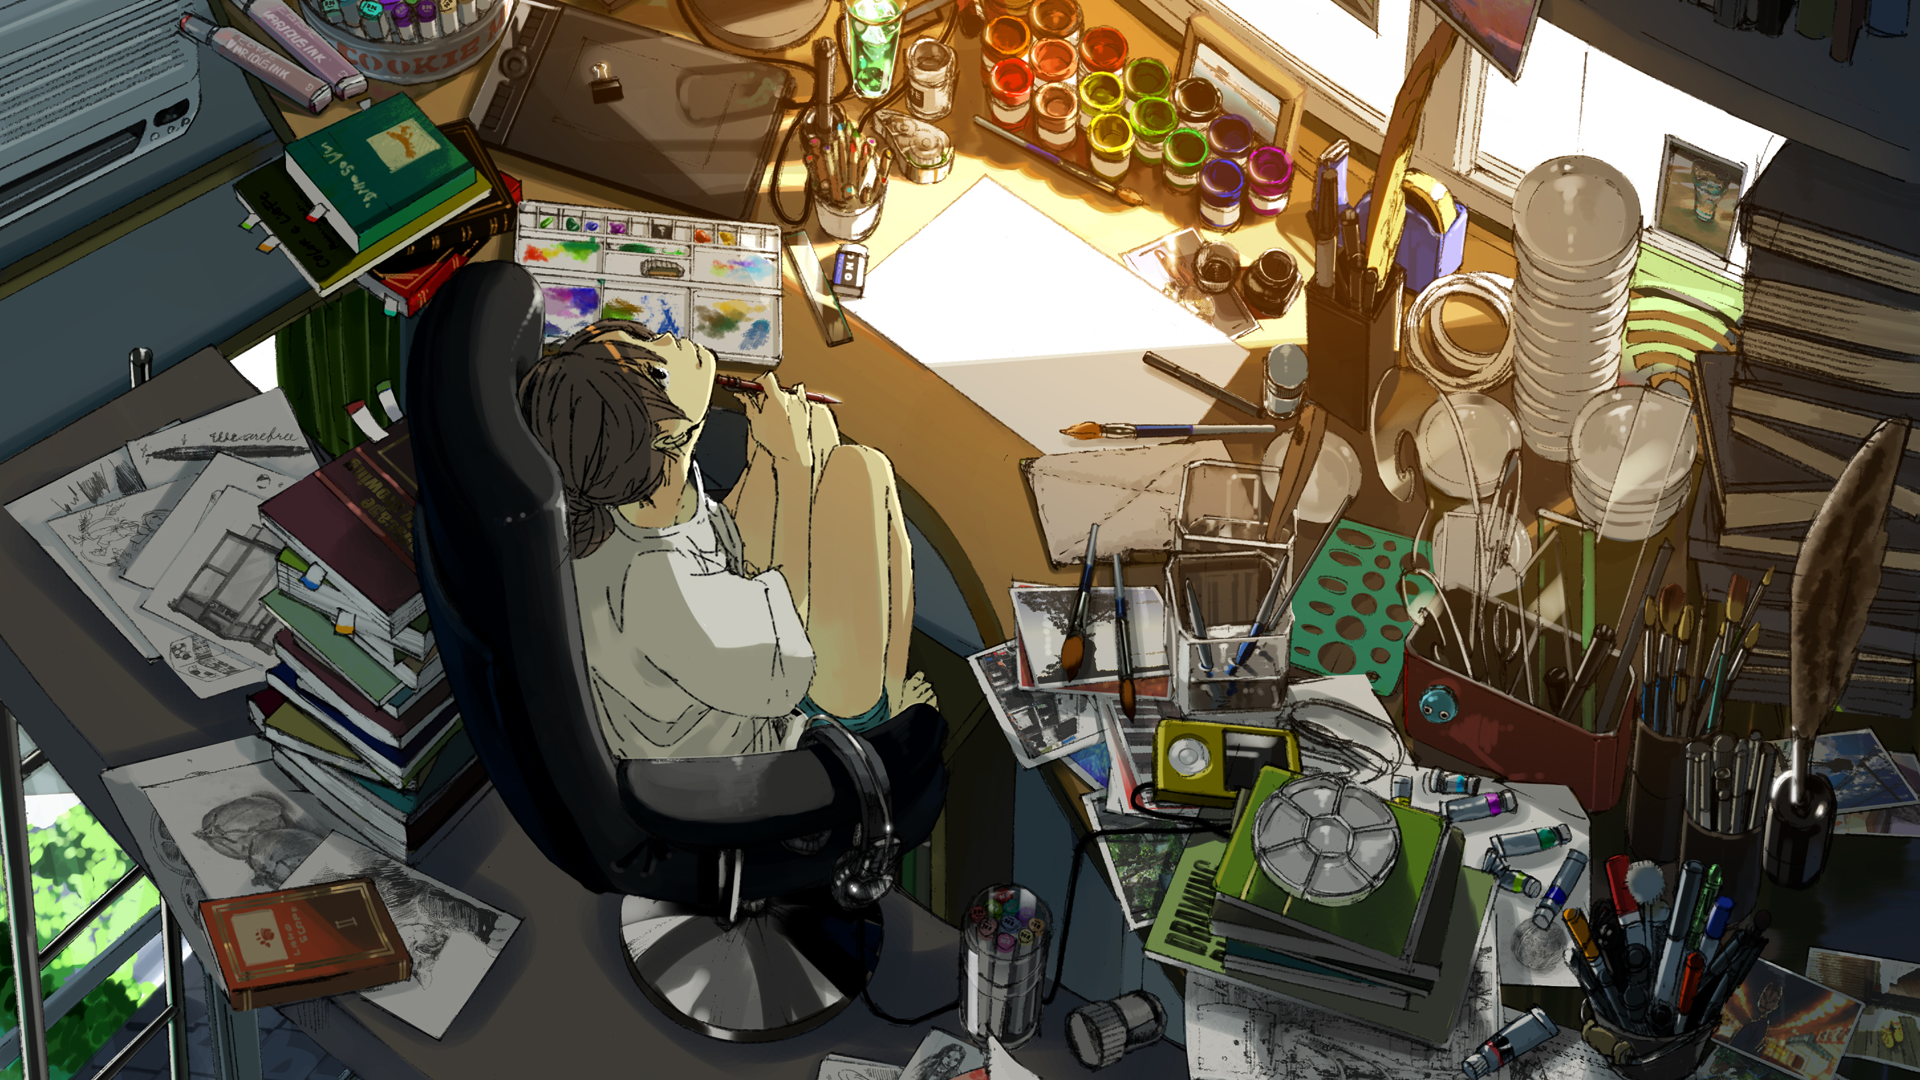 #clutter, #room, #anime girls, #original characters